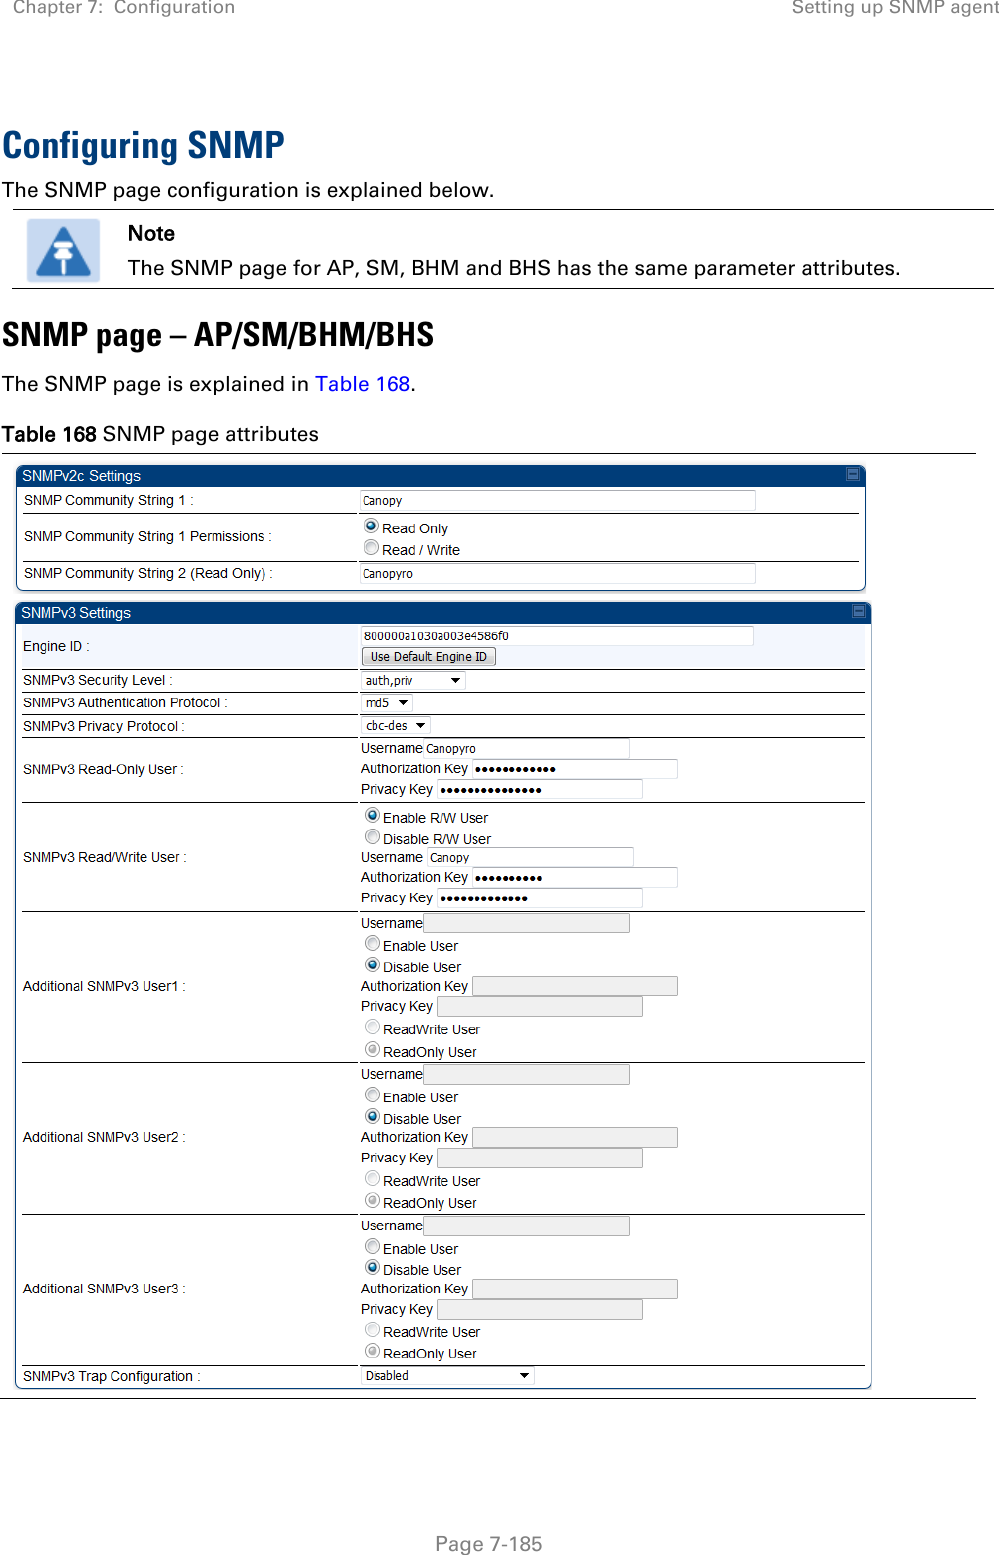 Chapter 7:  Configuration Setting up SNMP agent   Page 7-185  Configuring SNMP The SNMP page configuration is explained below.  Note The SNMP page for AP, SM, BHM and BHS has the same parameter attributes. SNMP page – AP/SM/BHM/BHS The SNMP page is explained in Table 168. Table 168 SNMP page attributes   